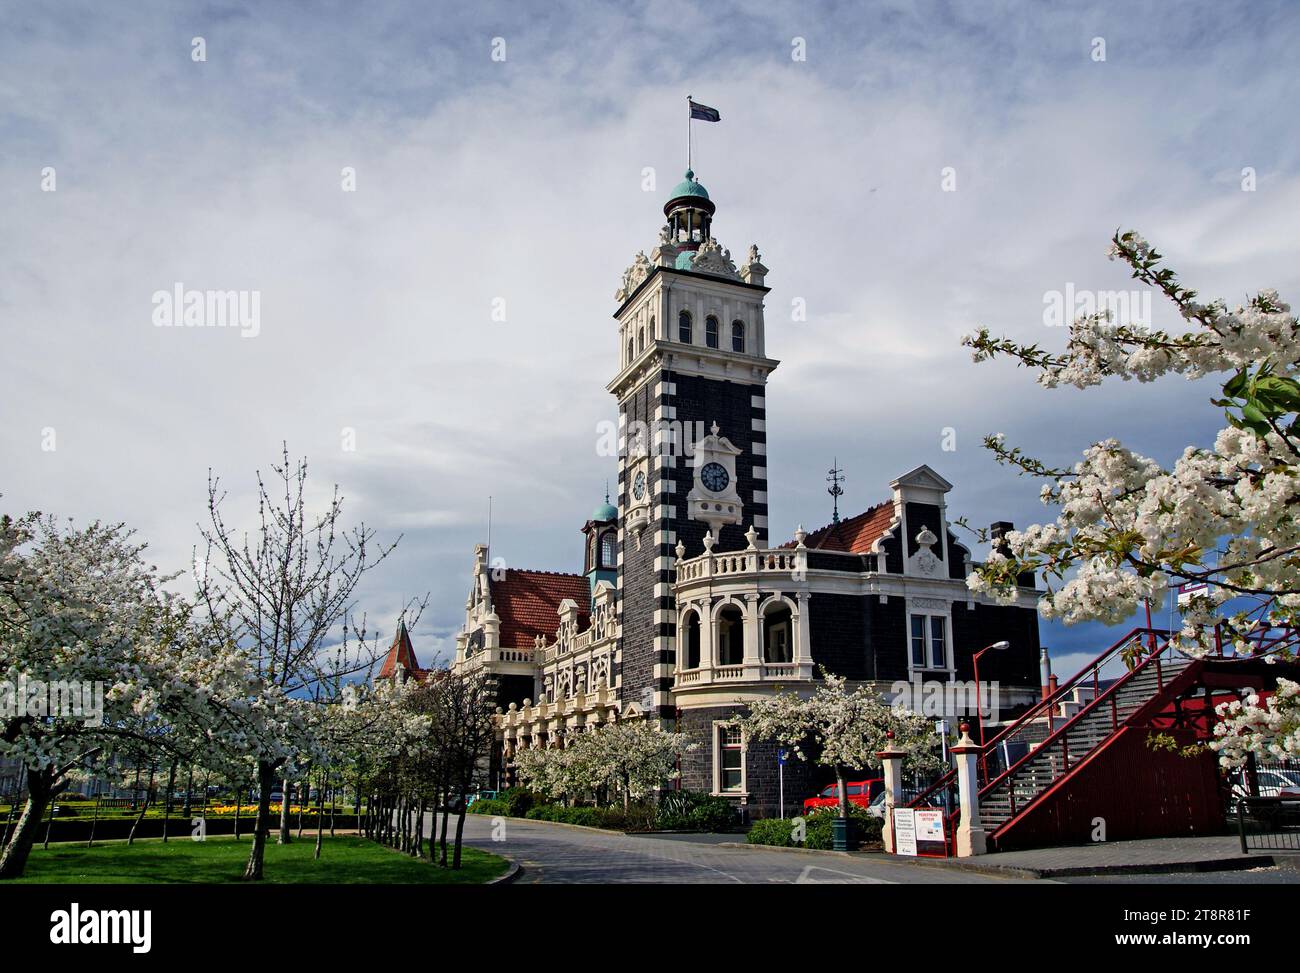 Dunedin Railway Station, This building perhaps embodies Dunedin's wealthy inheritance. During the city's most prosperous years this railway station was the country's busiest, handling up to 100 trains each day Stock Photo